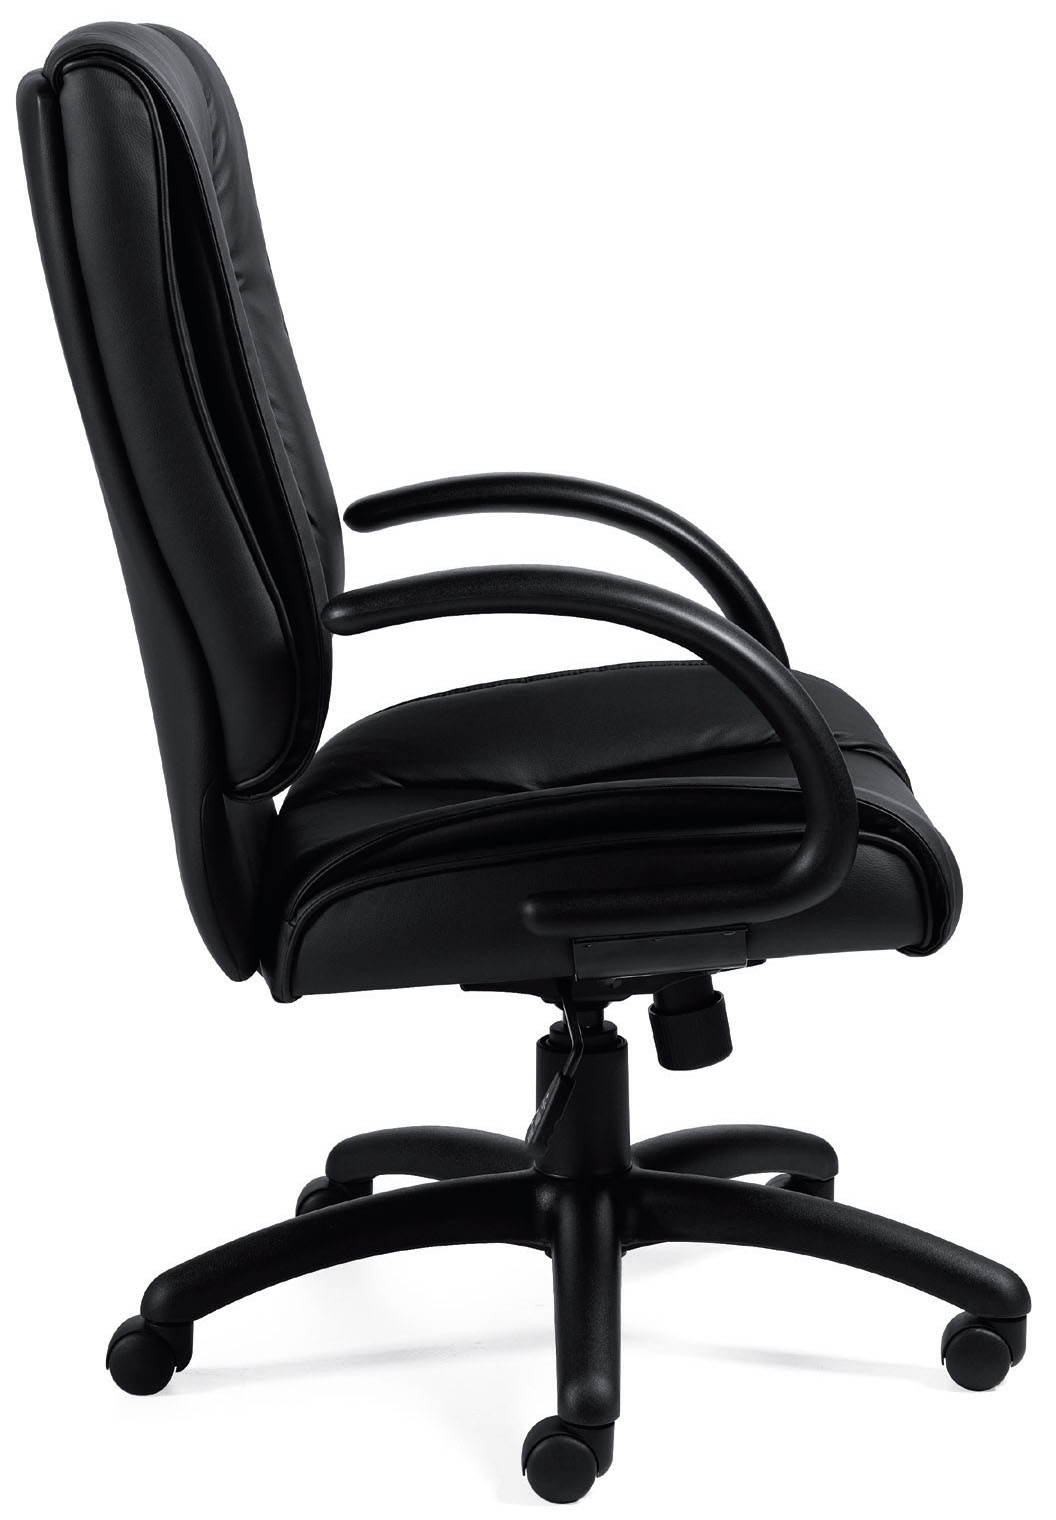 Offices To Go™ Luxhide Executive Chair with Reverse Curve Arms, OTG2700